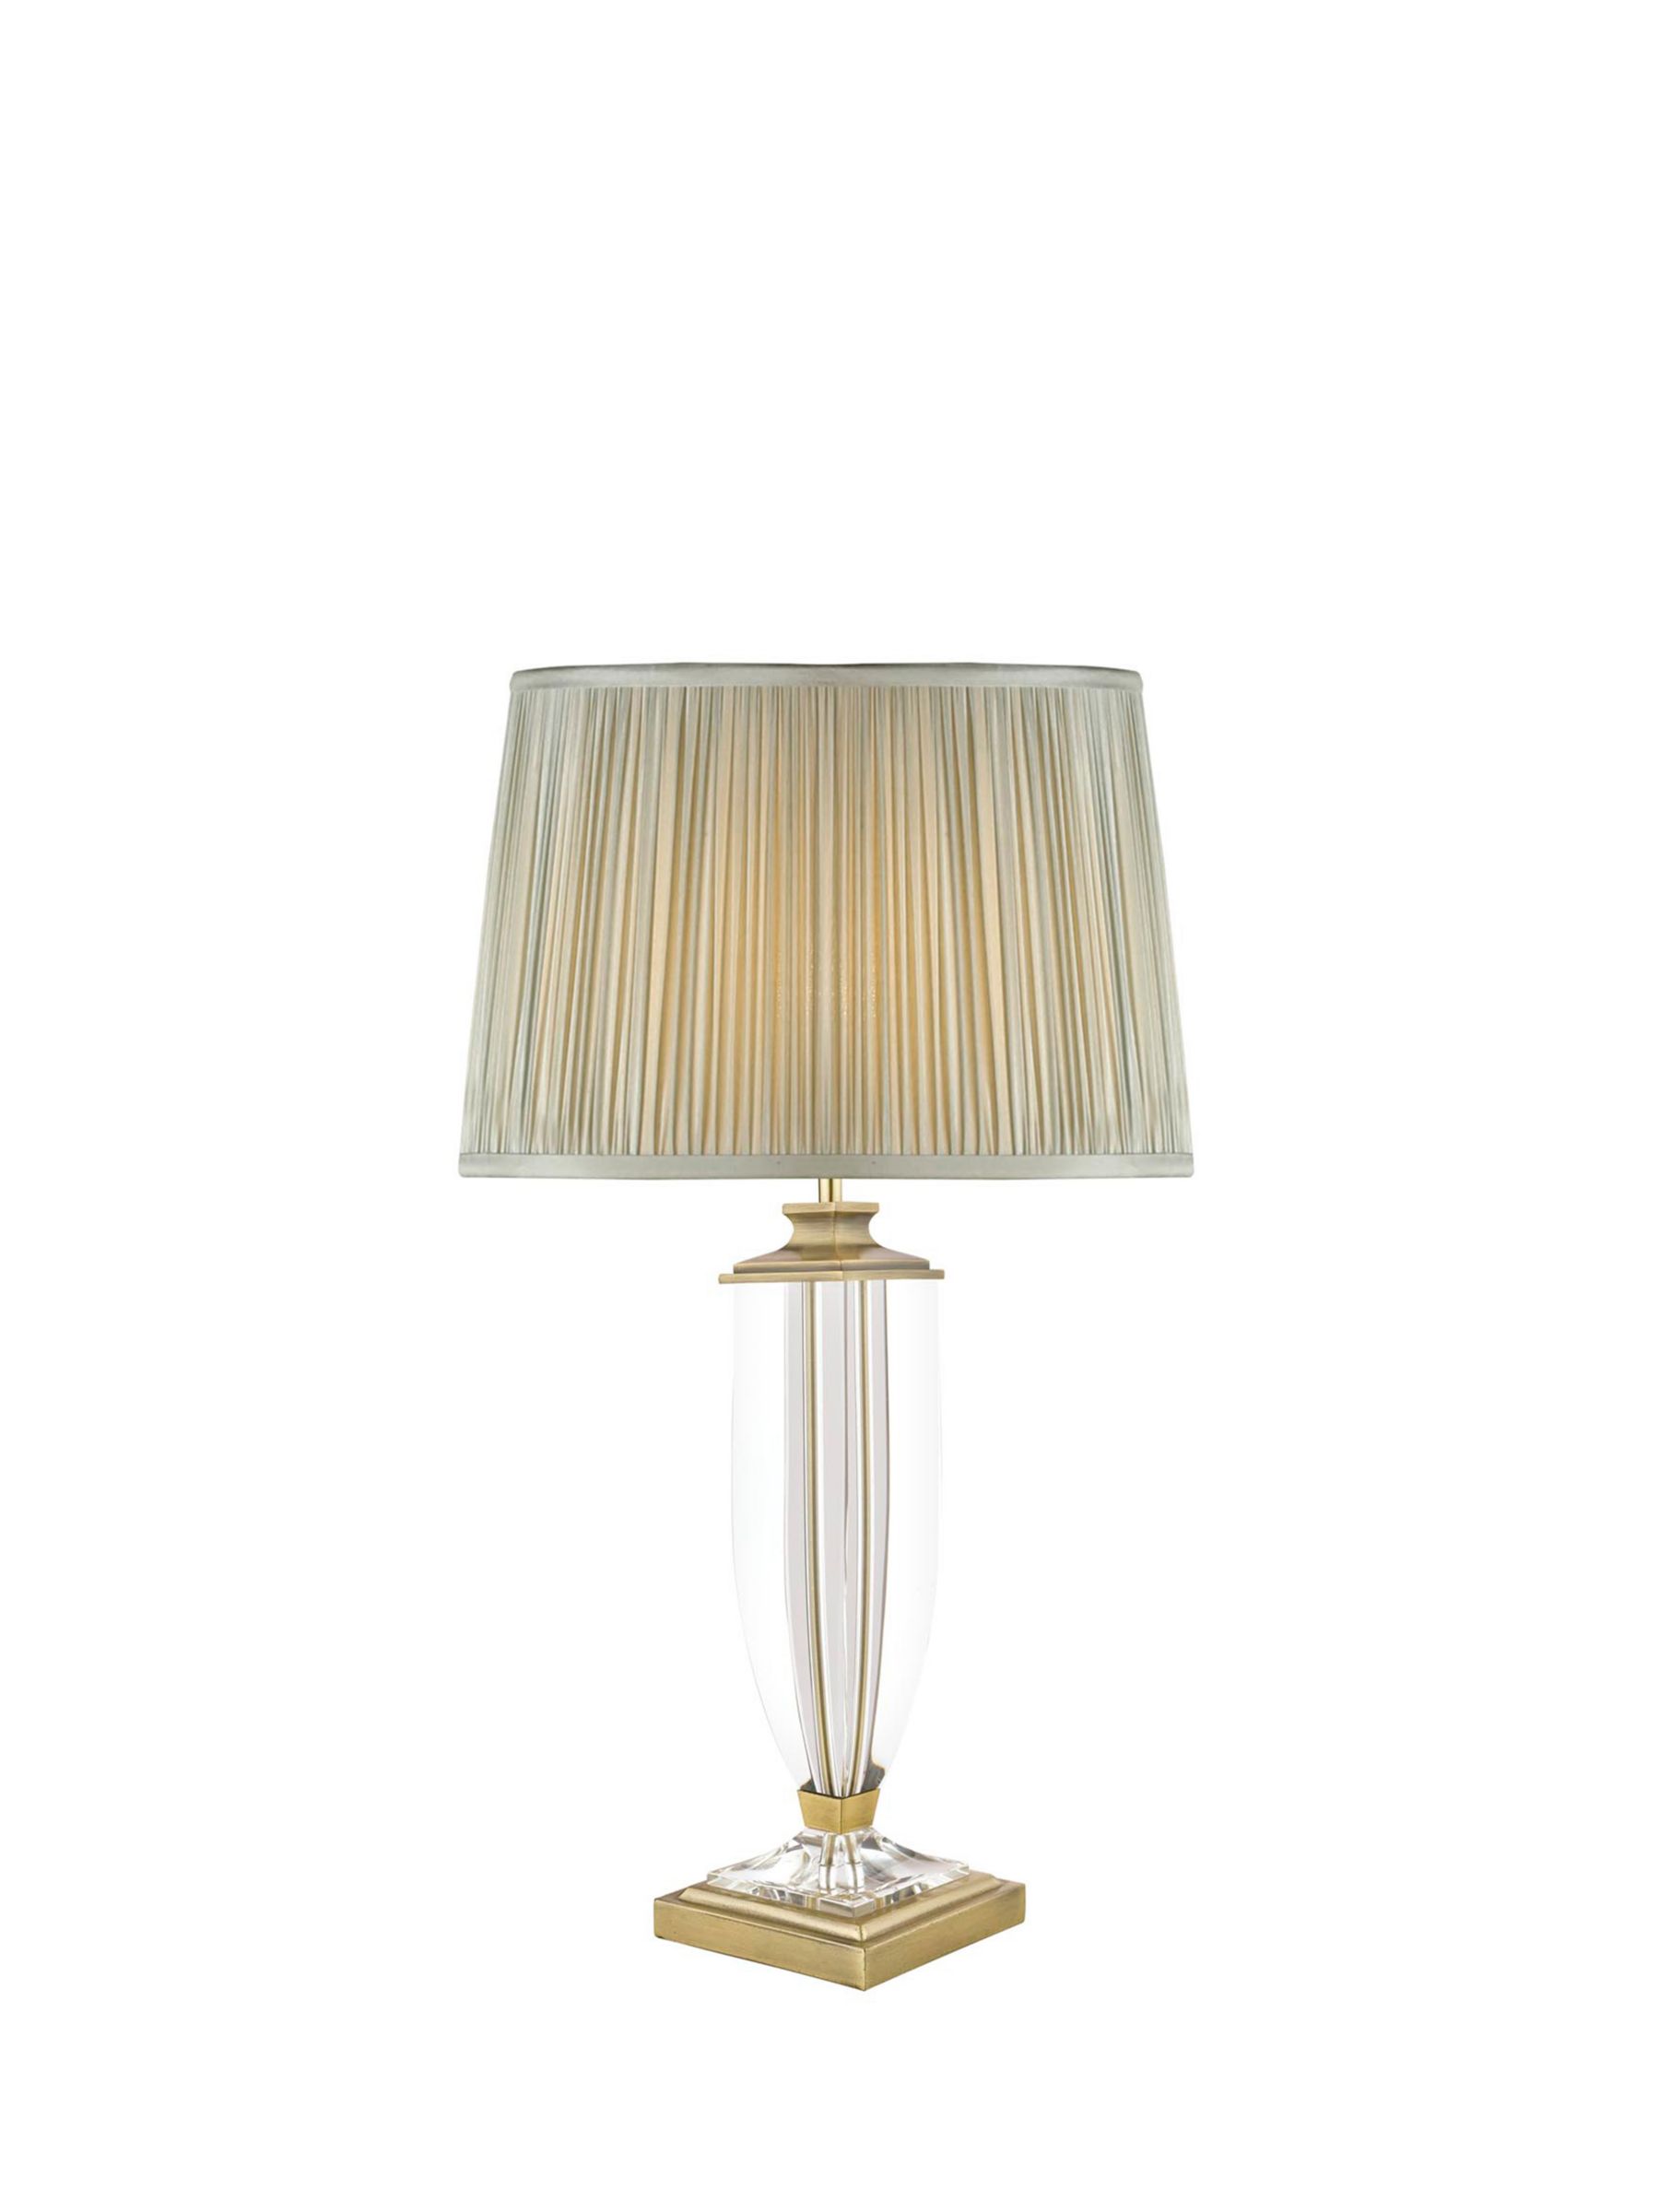 Photo of Laura ashley carson crystal table lamp antique brass